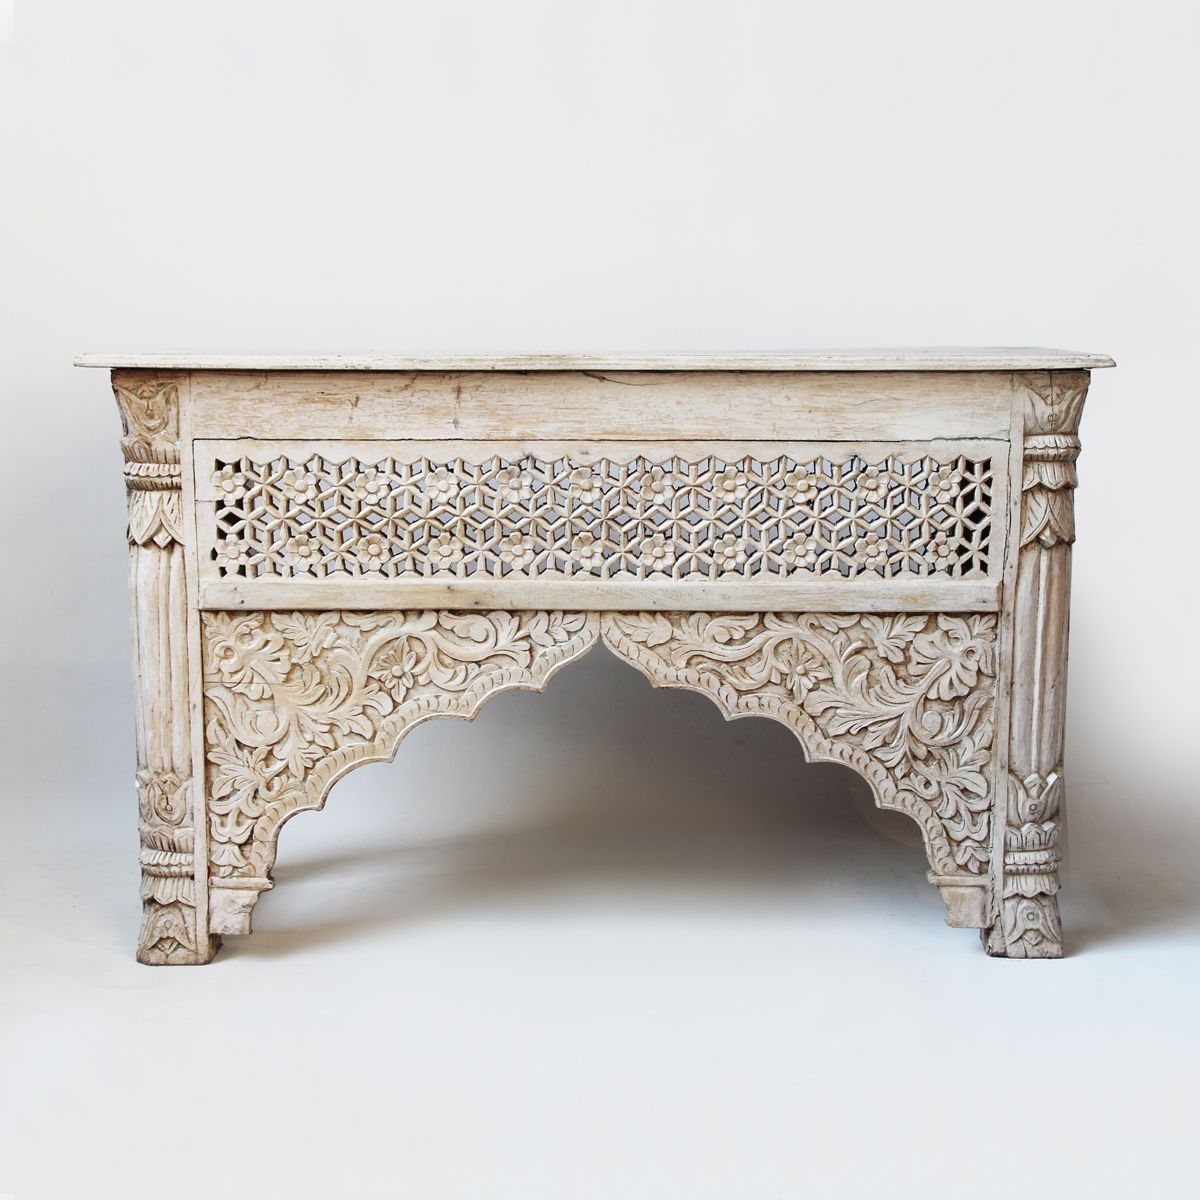 White Wash Carved Wood Architectural Console Table. | Colonial Throughout Hand Carved White Wash Console Tables (Gallery 1 of 20)